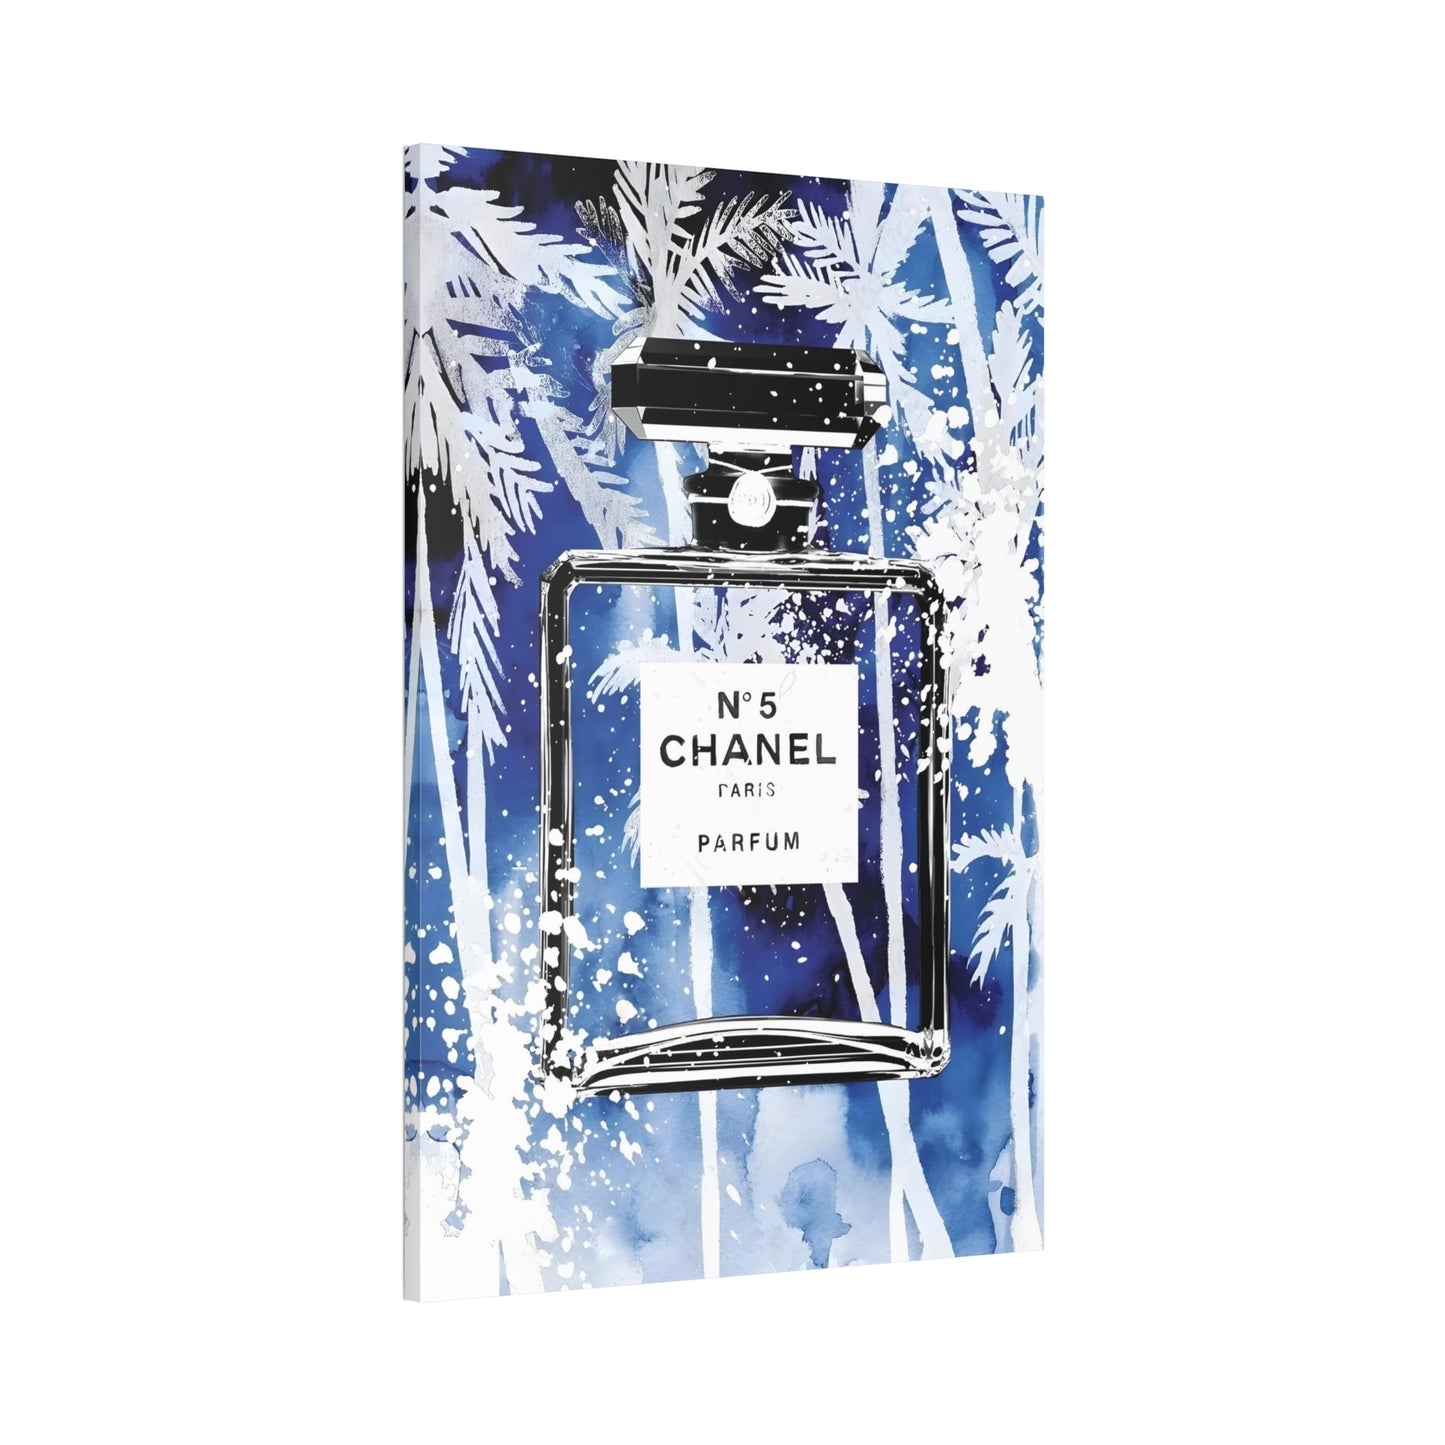 Effortless Elegance: Chanel-Inspired Wall Art on Natural Canvas & Poster